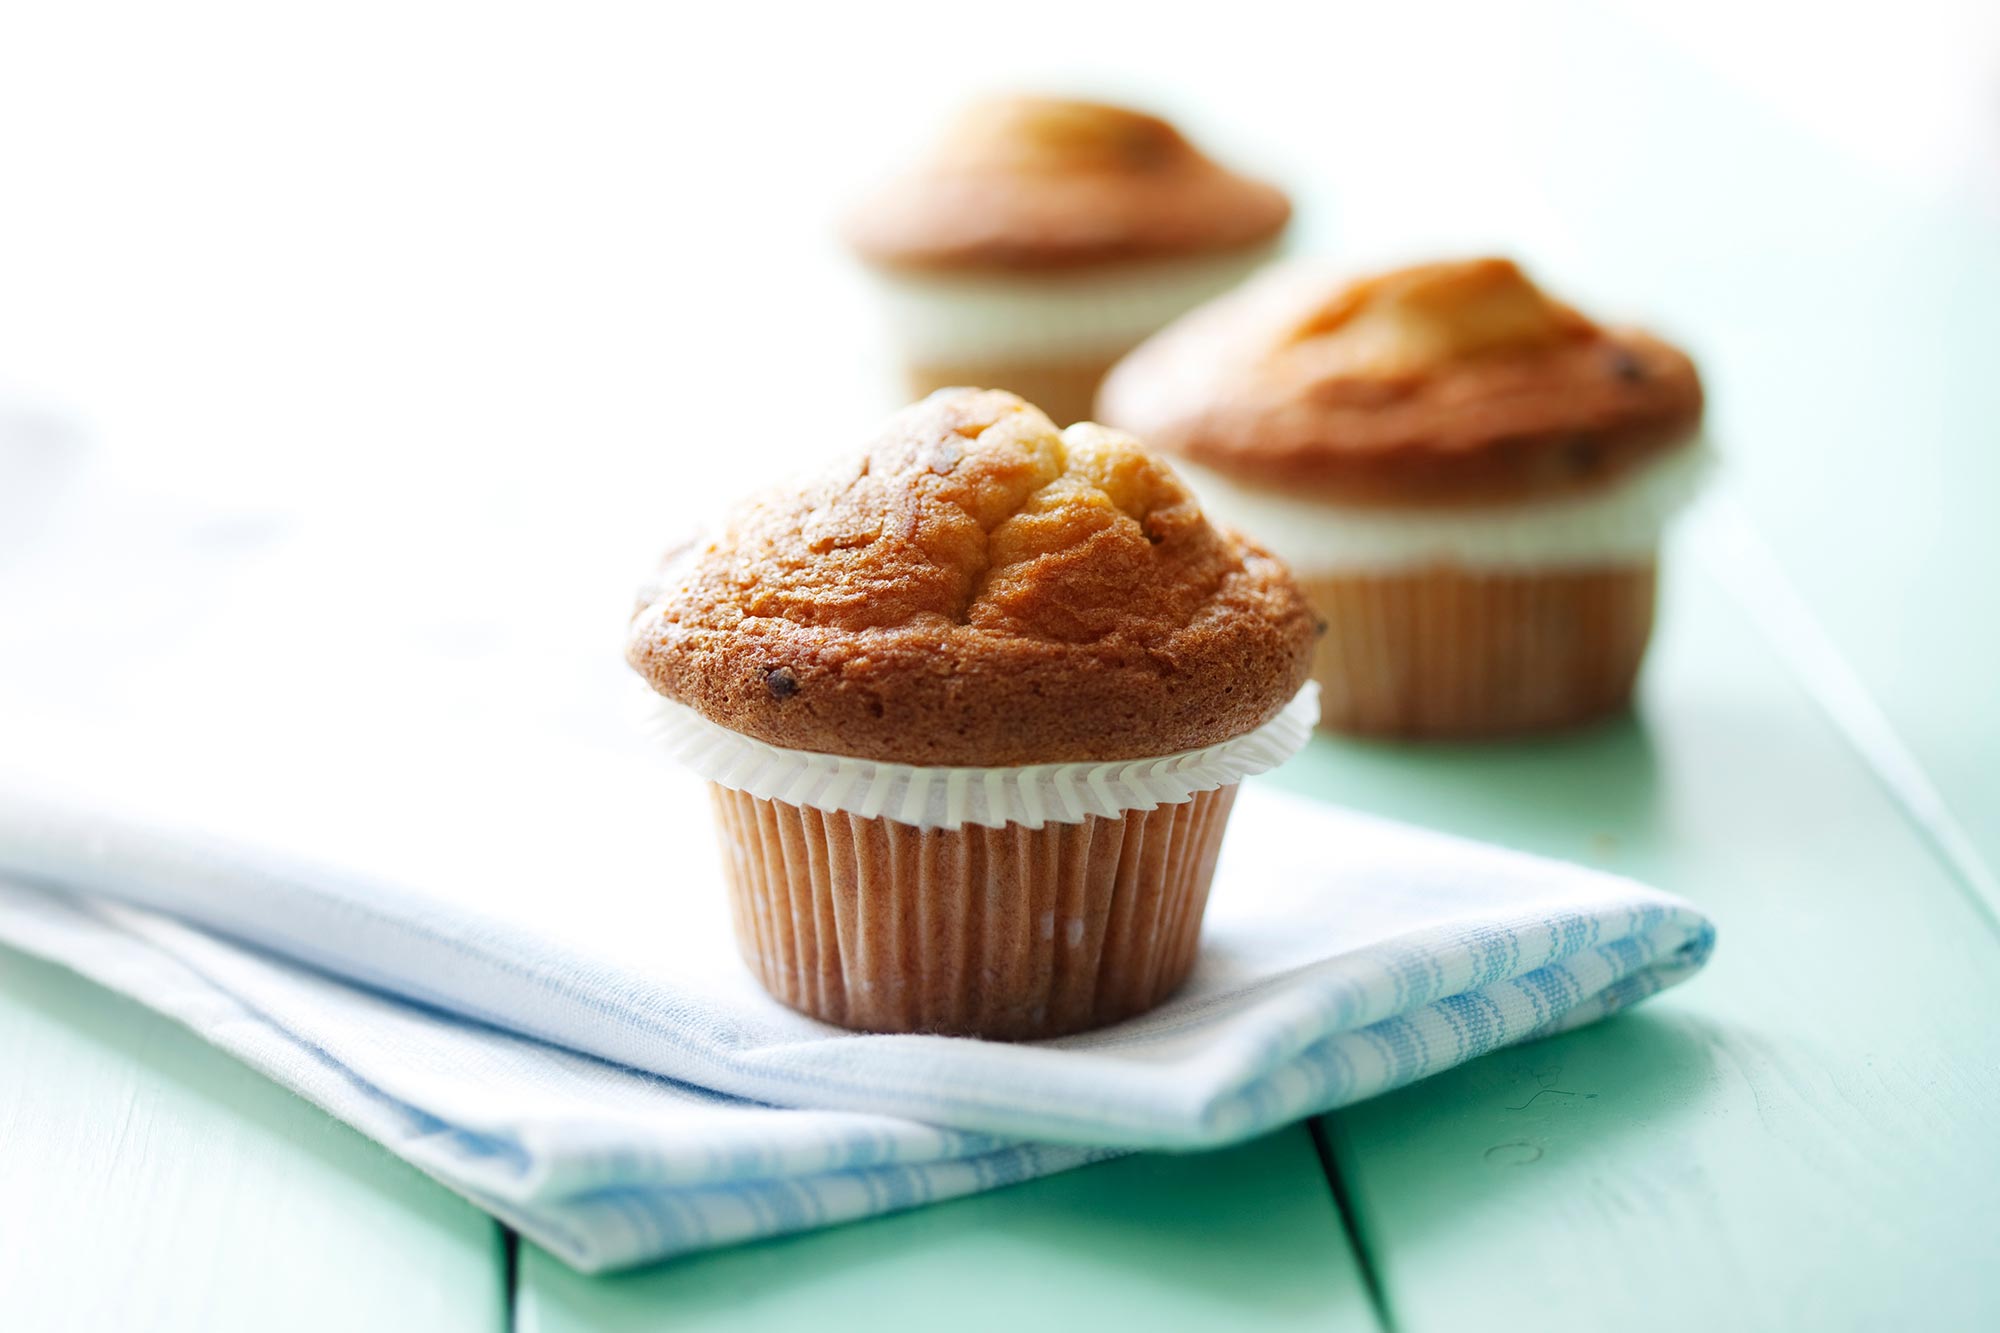 https://scitechdaily.com/images/Fresh-Baked-Muffins.jpg